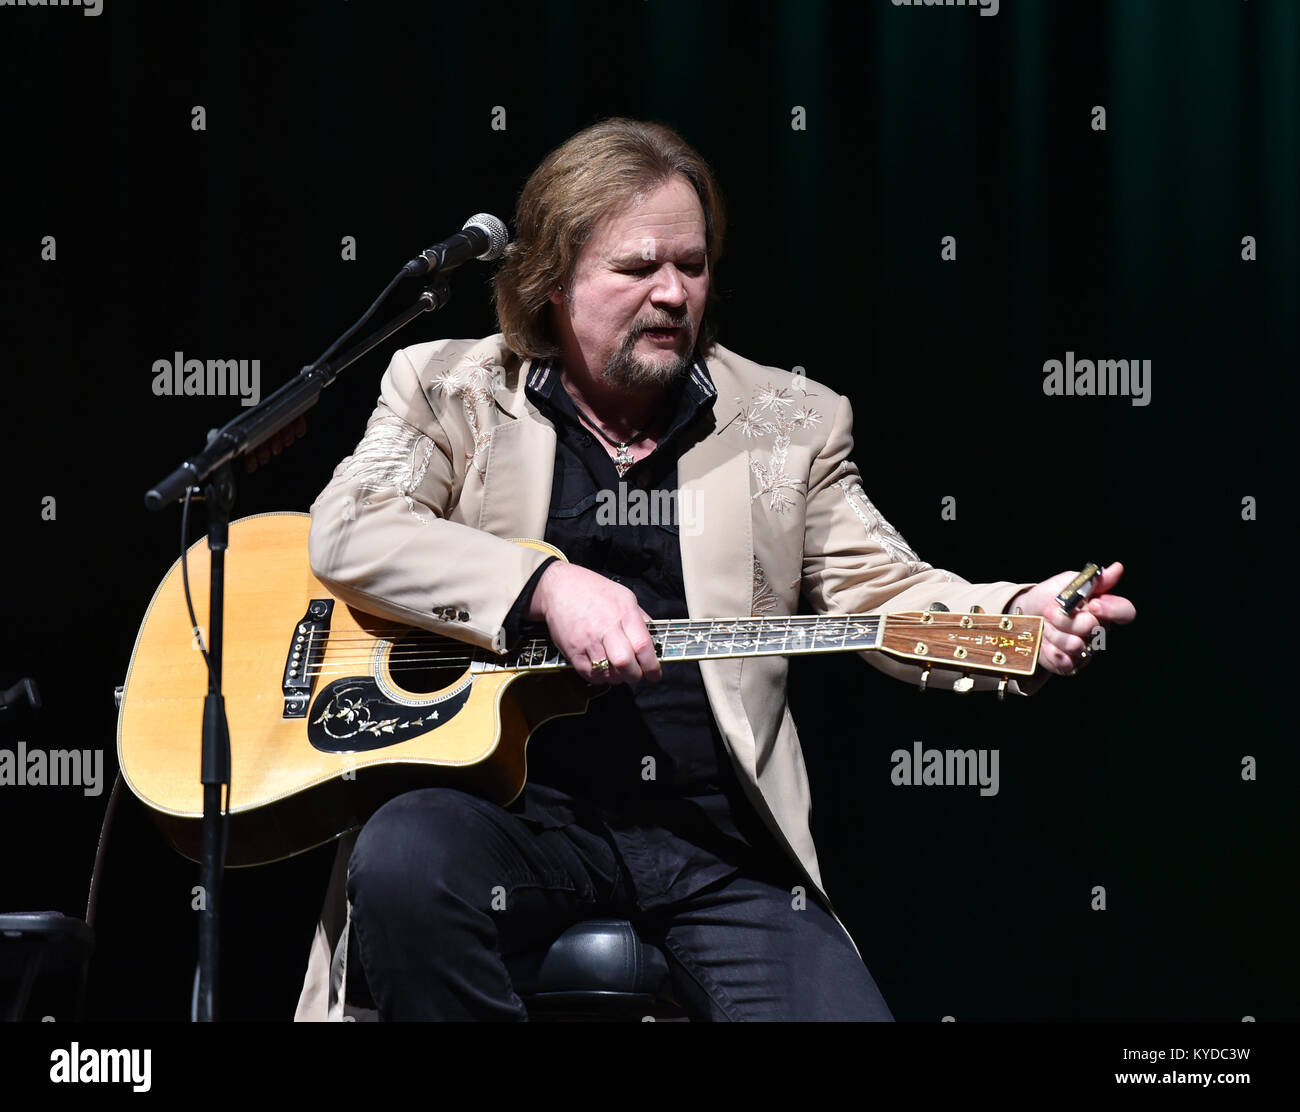 Virginia Beach, VIRGINIA, USA. 12th Jan, 2018. TRAVIS TRITT brings his brand of rocking country to the SANDLER CENTER in VIRGINIA BEACH, VIRGINIA on 12 JANUARY 2018. © Jeff Moore 2018 Credit: Jeff Moore/ZUMA Wire/Alamy Live News Stock Photo